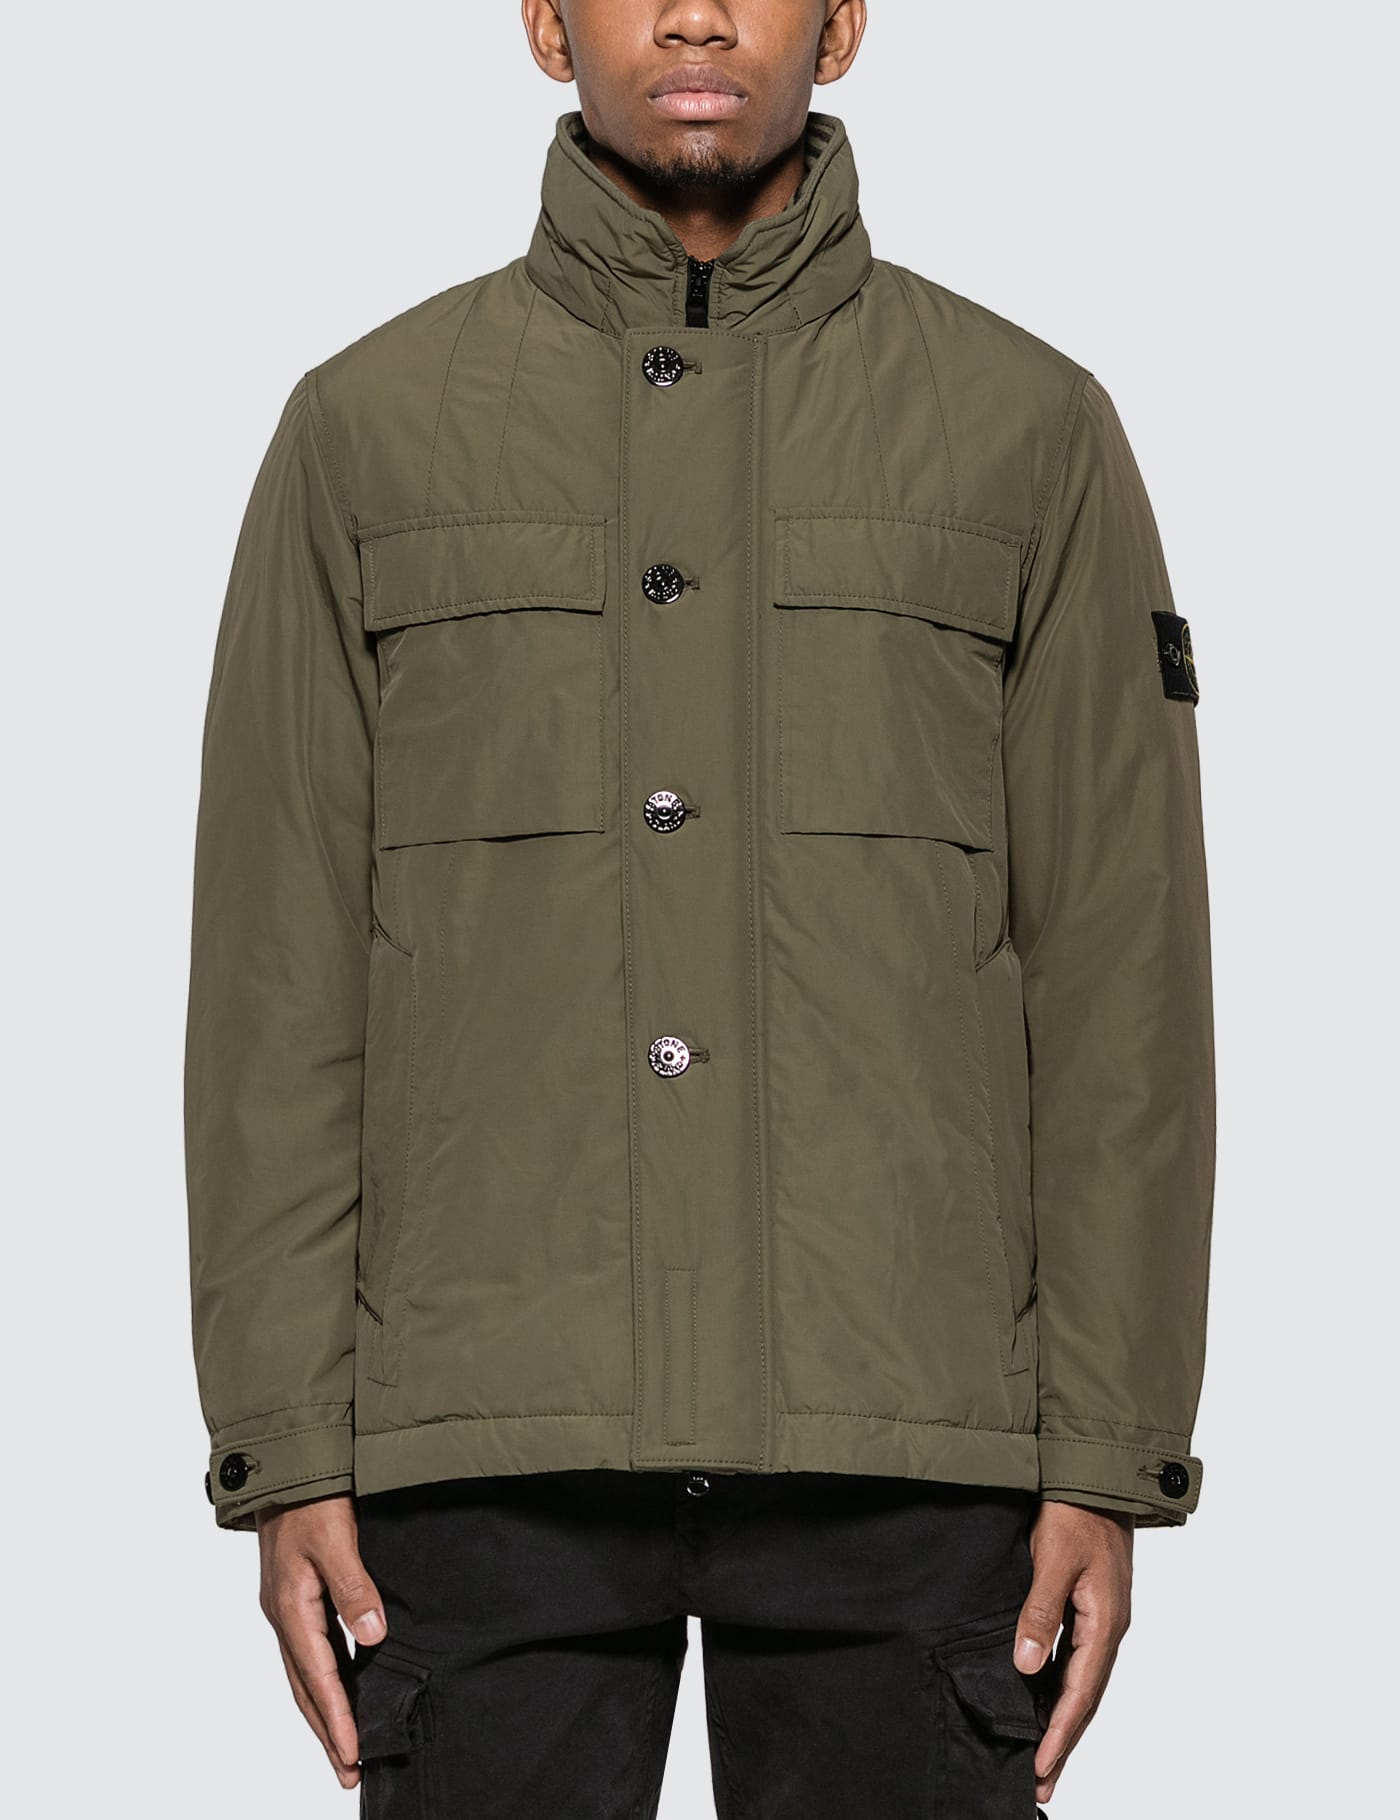 Stone Island - Micro Reps Hooded Jacket | HBX - Globally Curated 